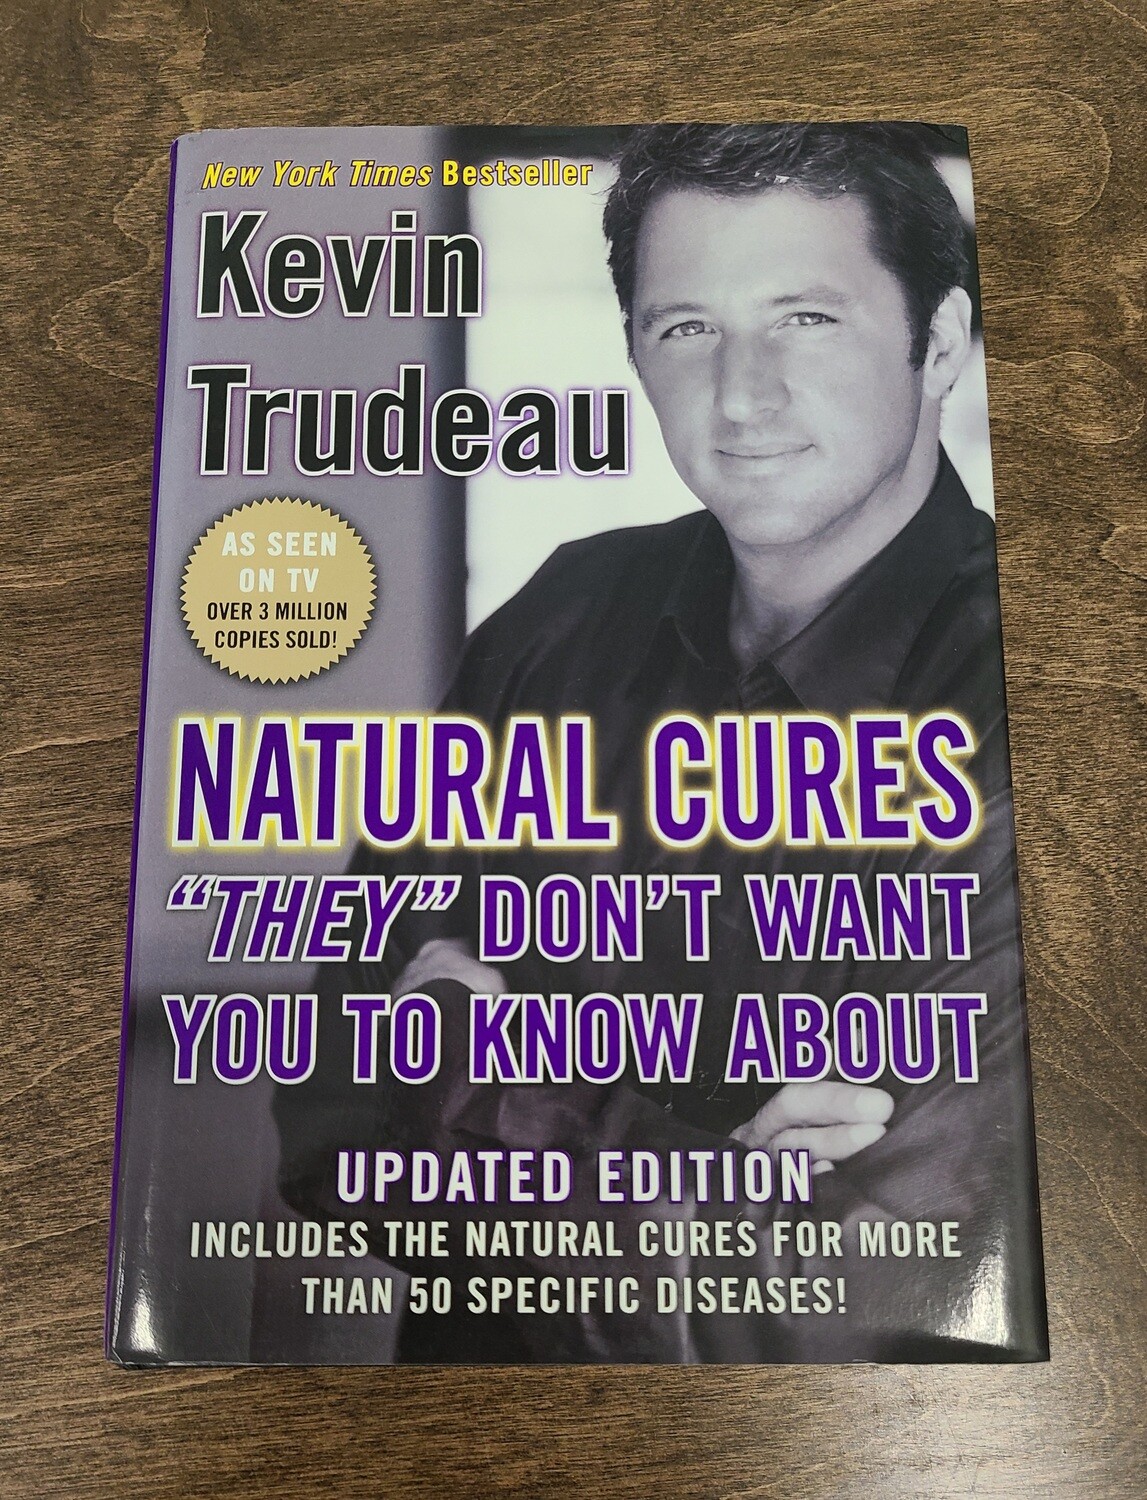 Natural Cures "They" Don't Want You to Know About by Kevin Trudeau